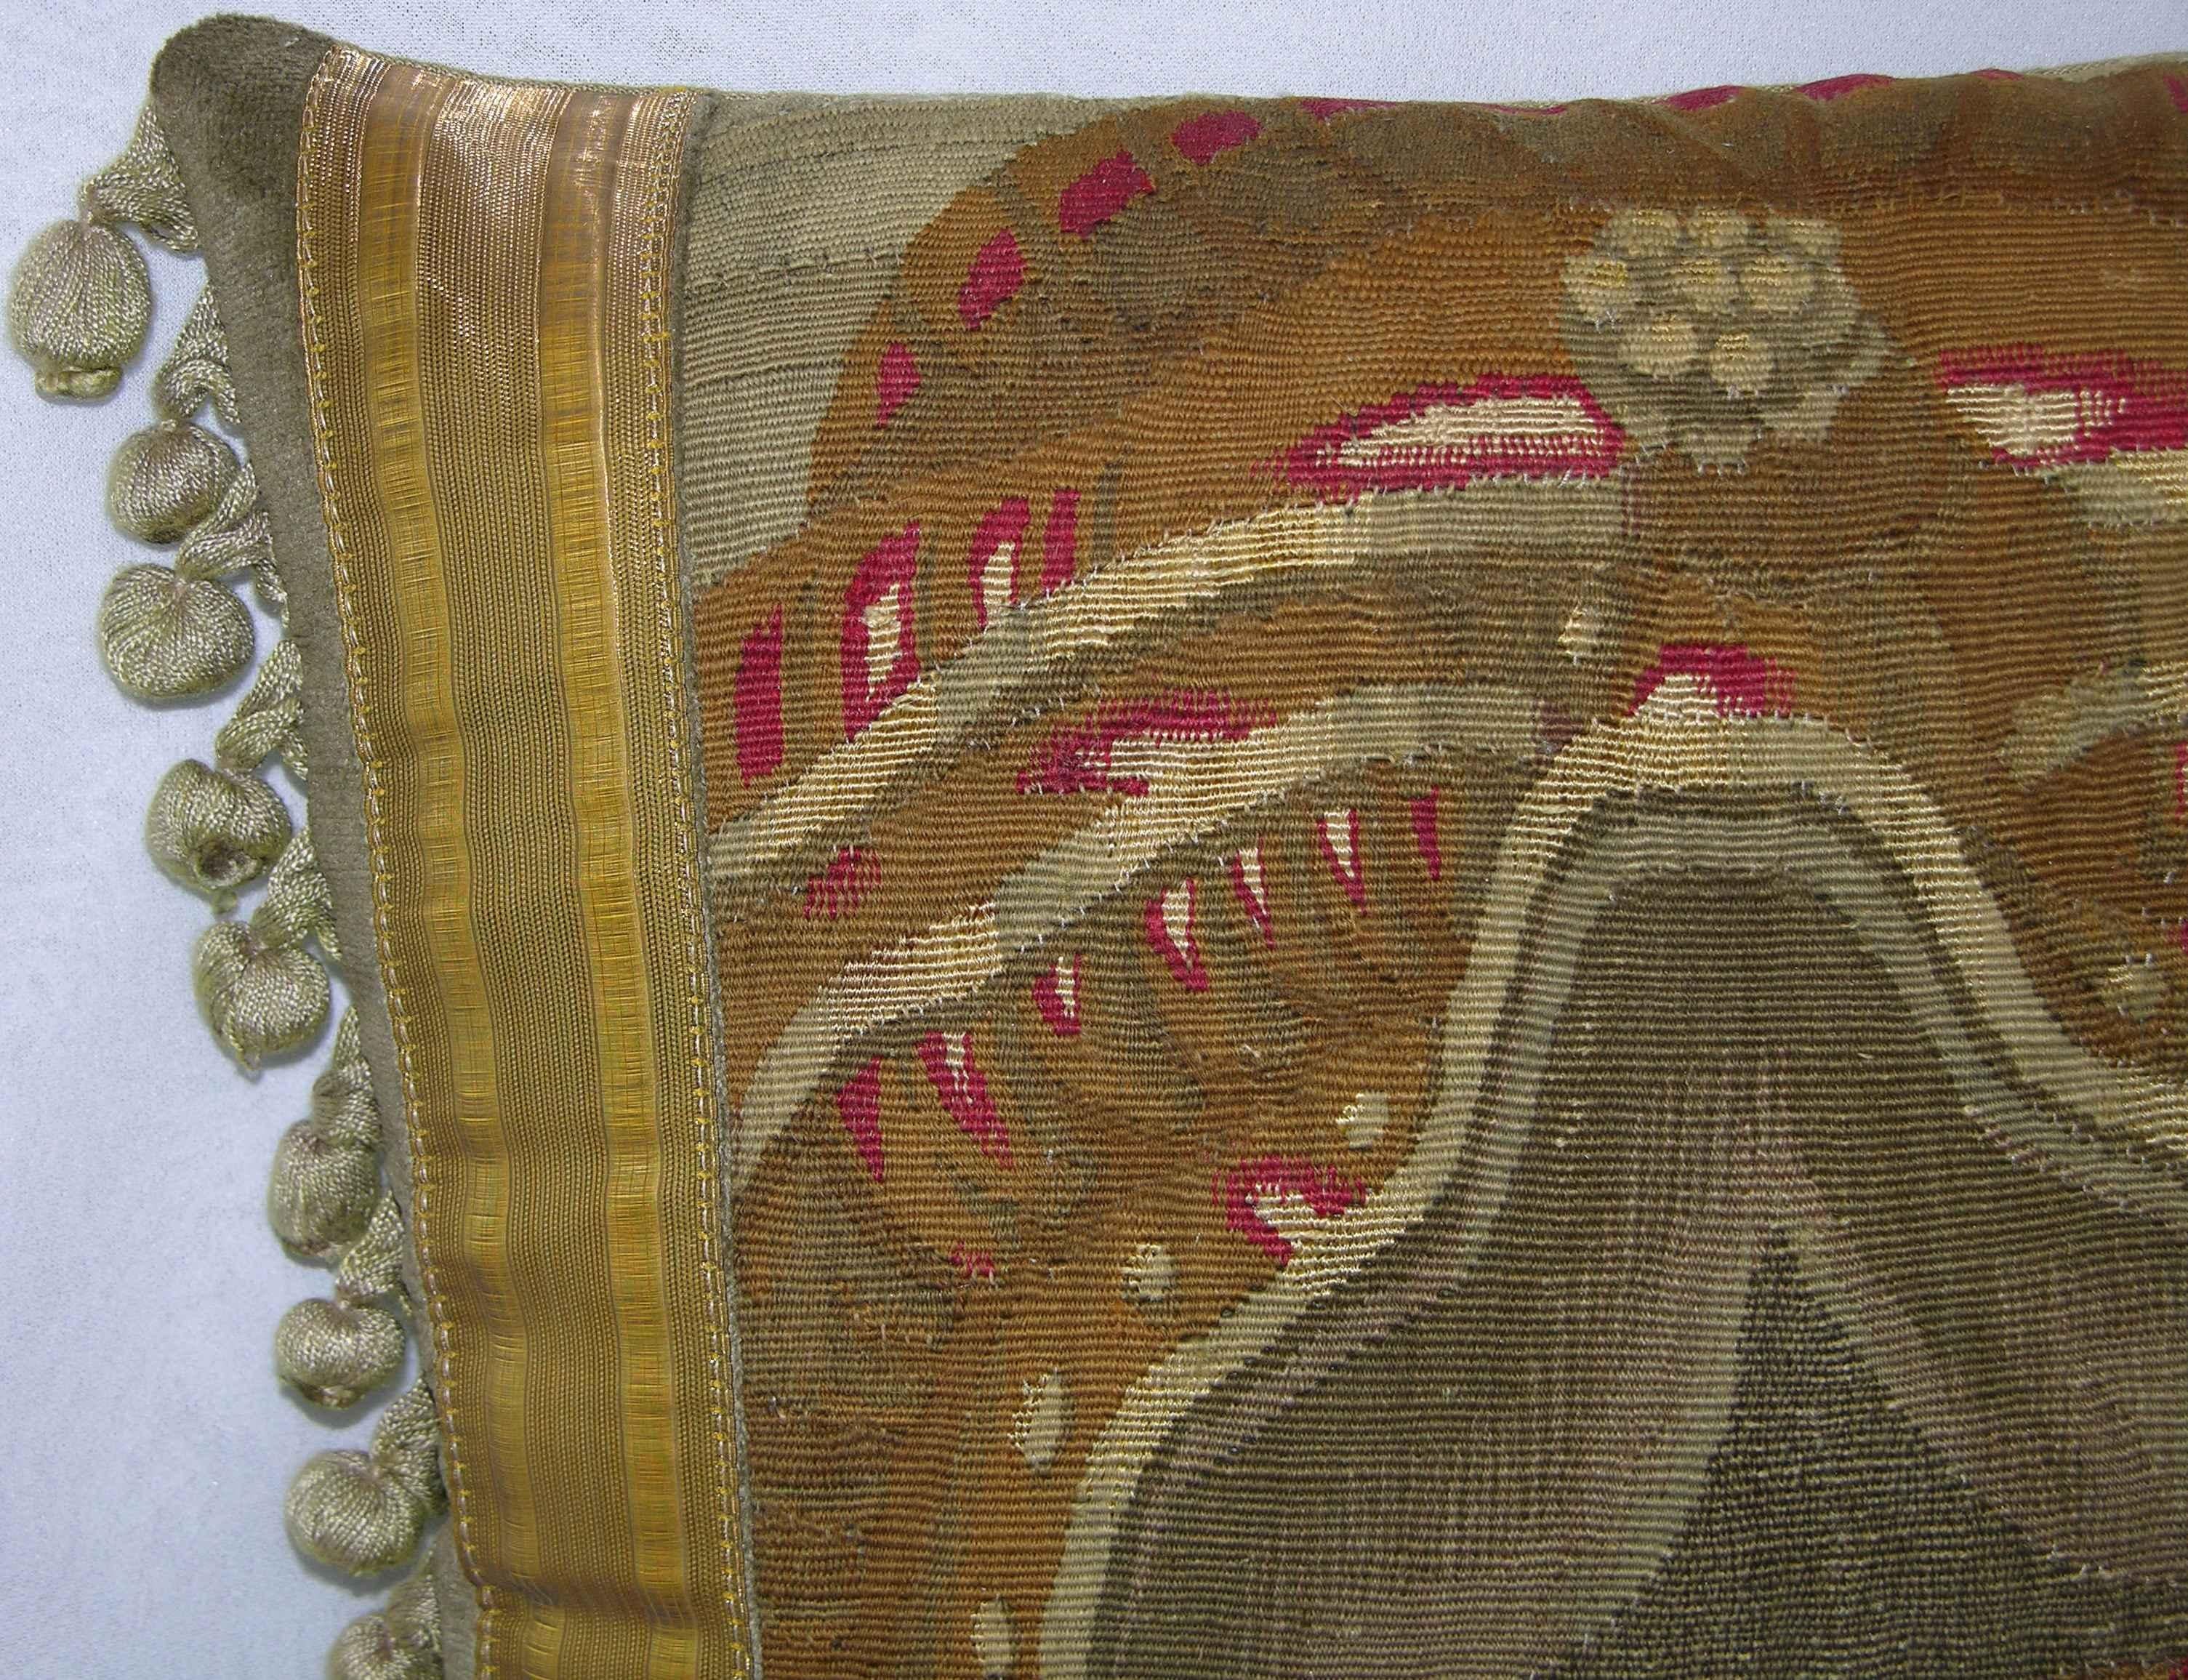 Antique brussels tapestry pillow circa 17th century 1775p.